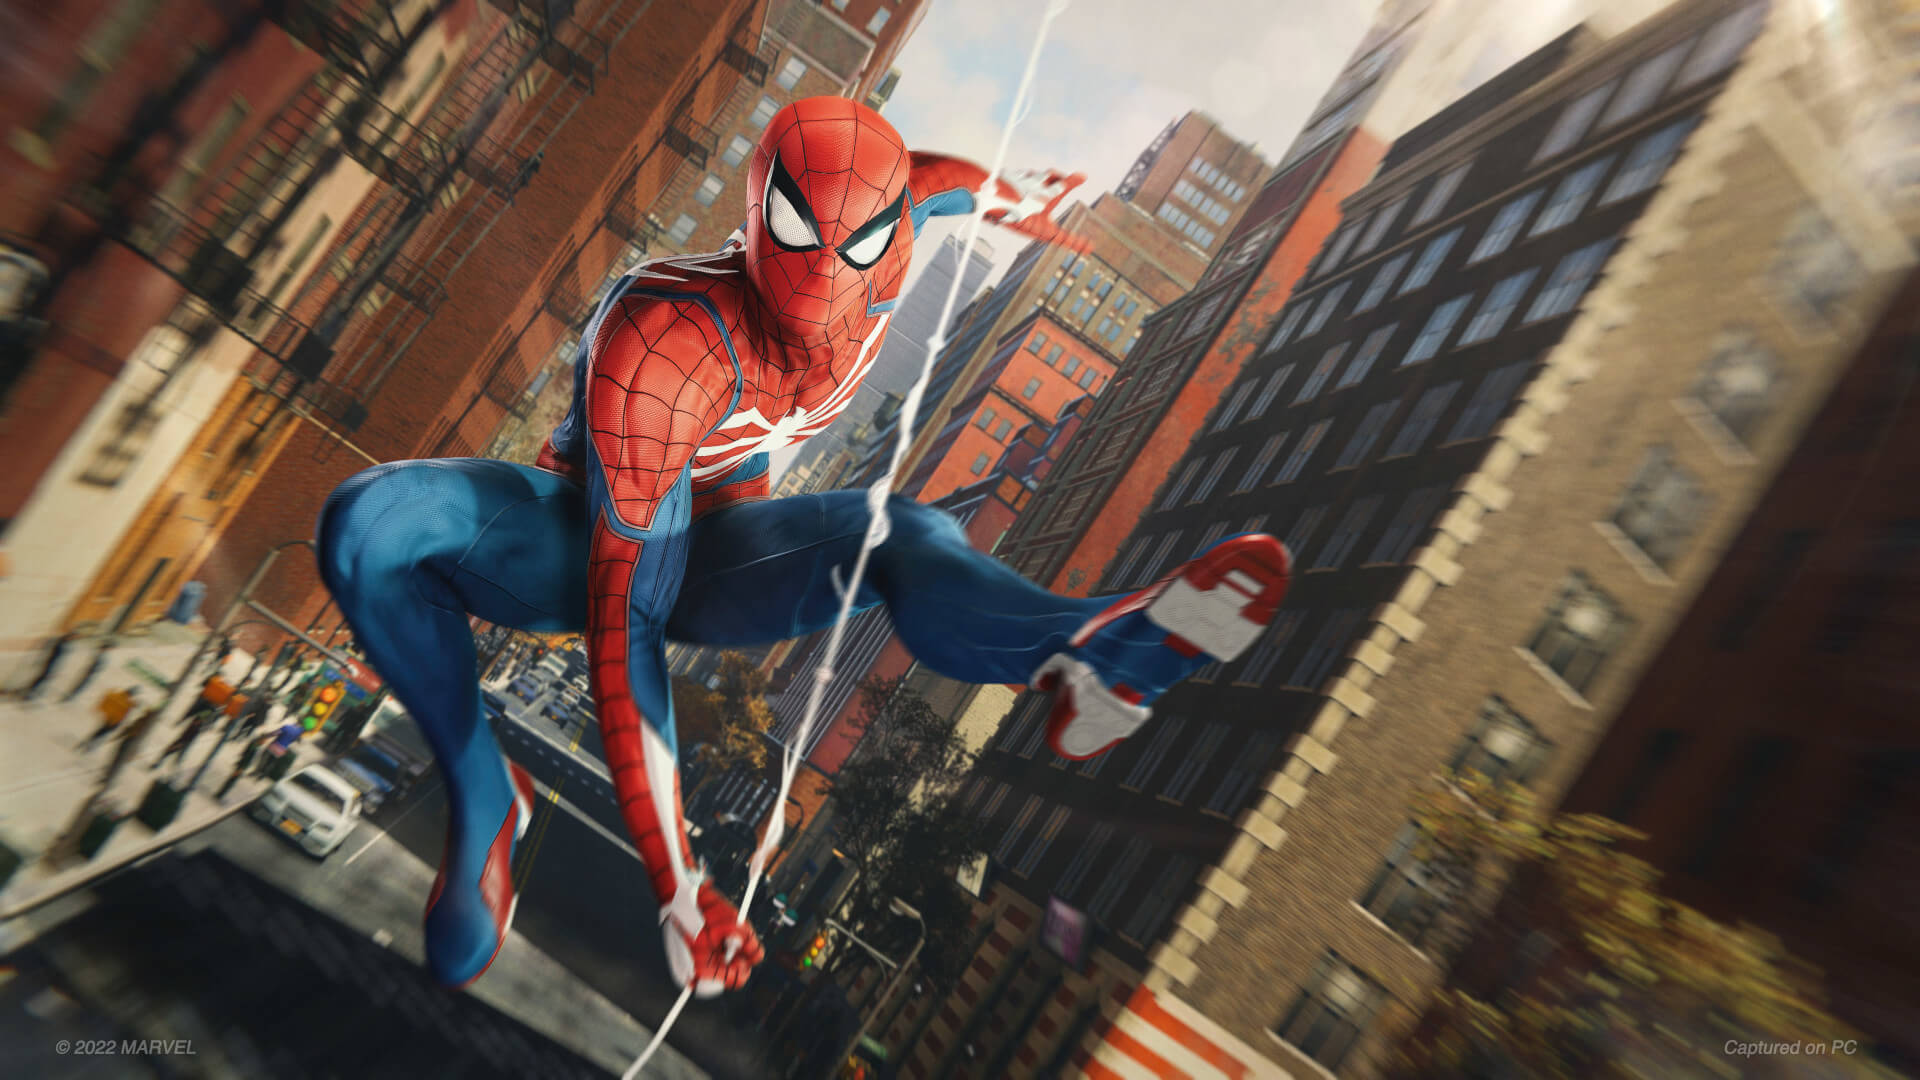 Spider-Man swinging through the city in Marvel's Spider-Man on PC, which sold pretty well according to the August 2022 NPD results